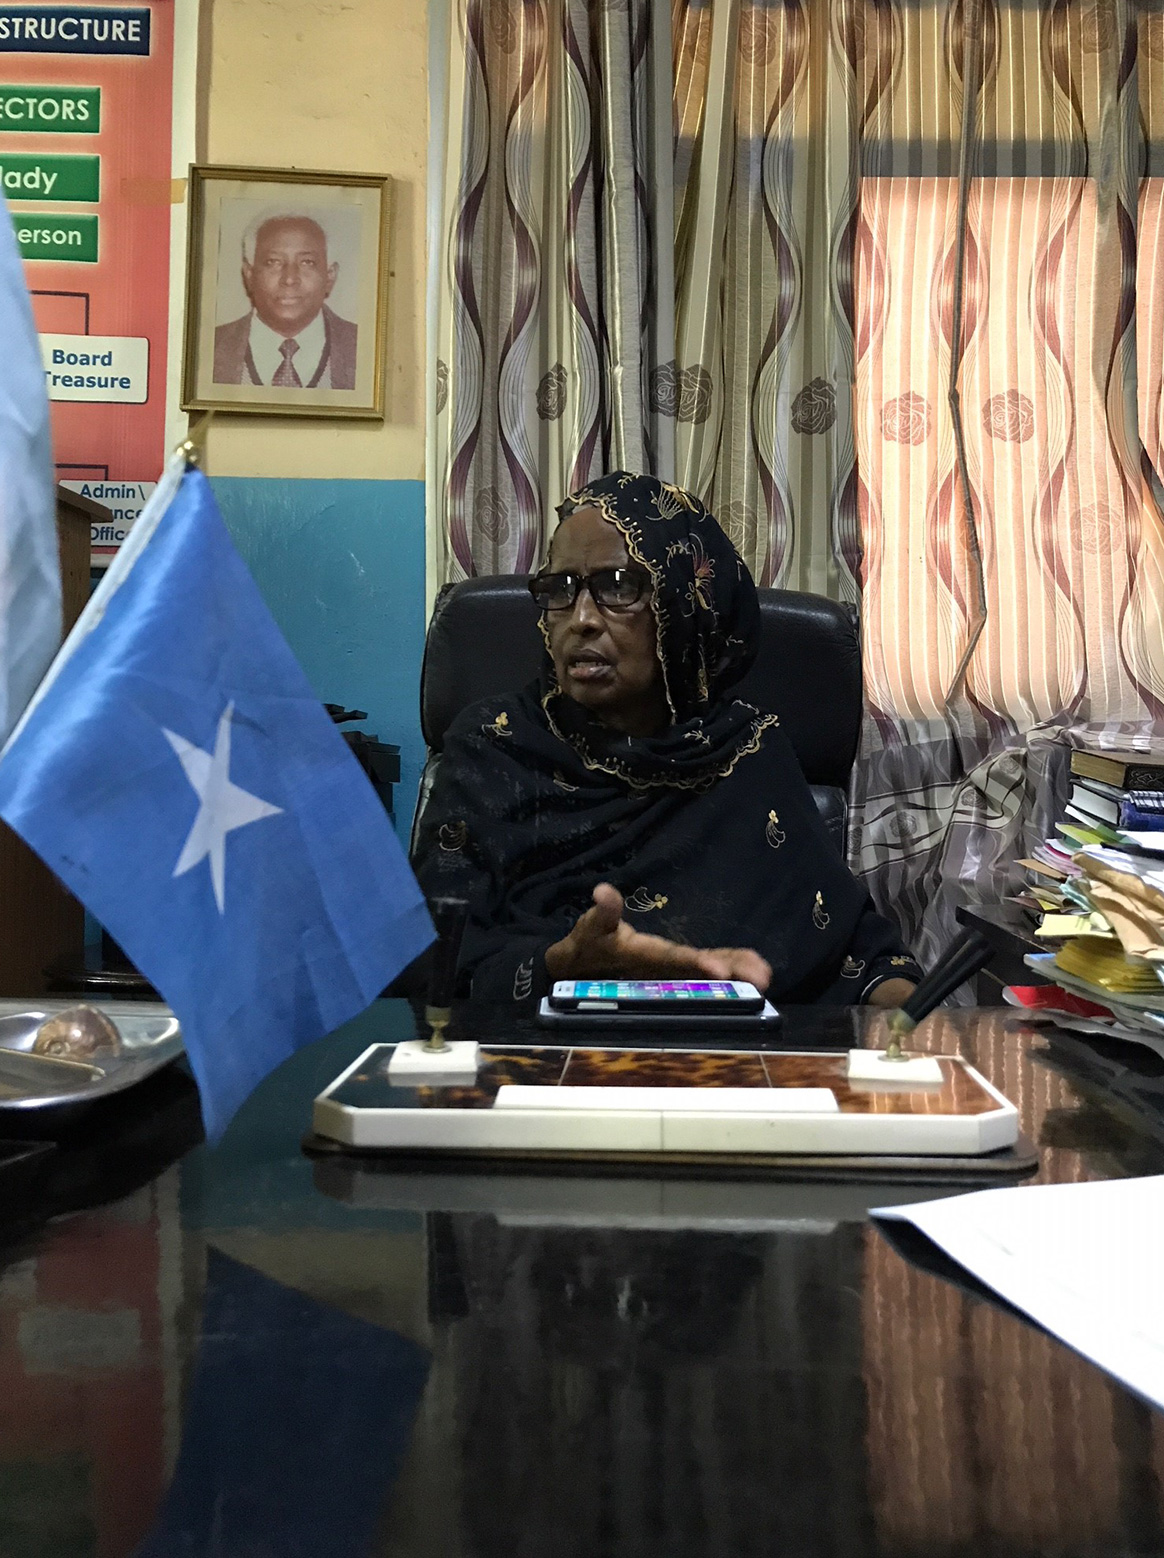 Mama Ayesha, a leader of eradication efforts in her district, considers what drives her work. © WHO Somalia